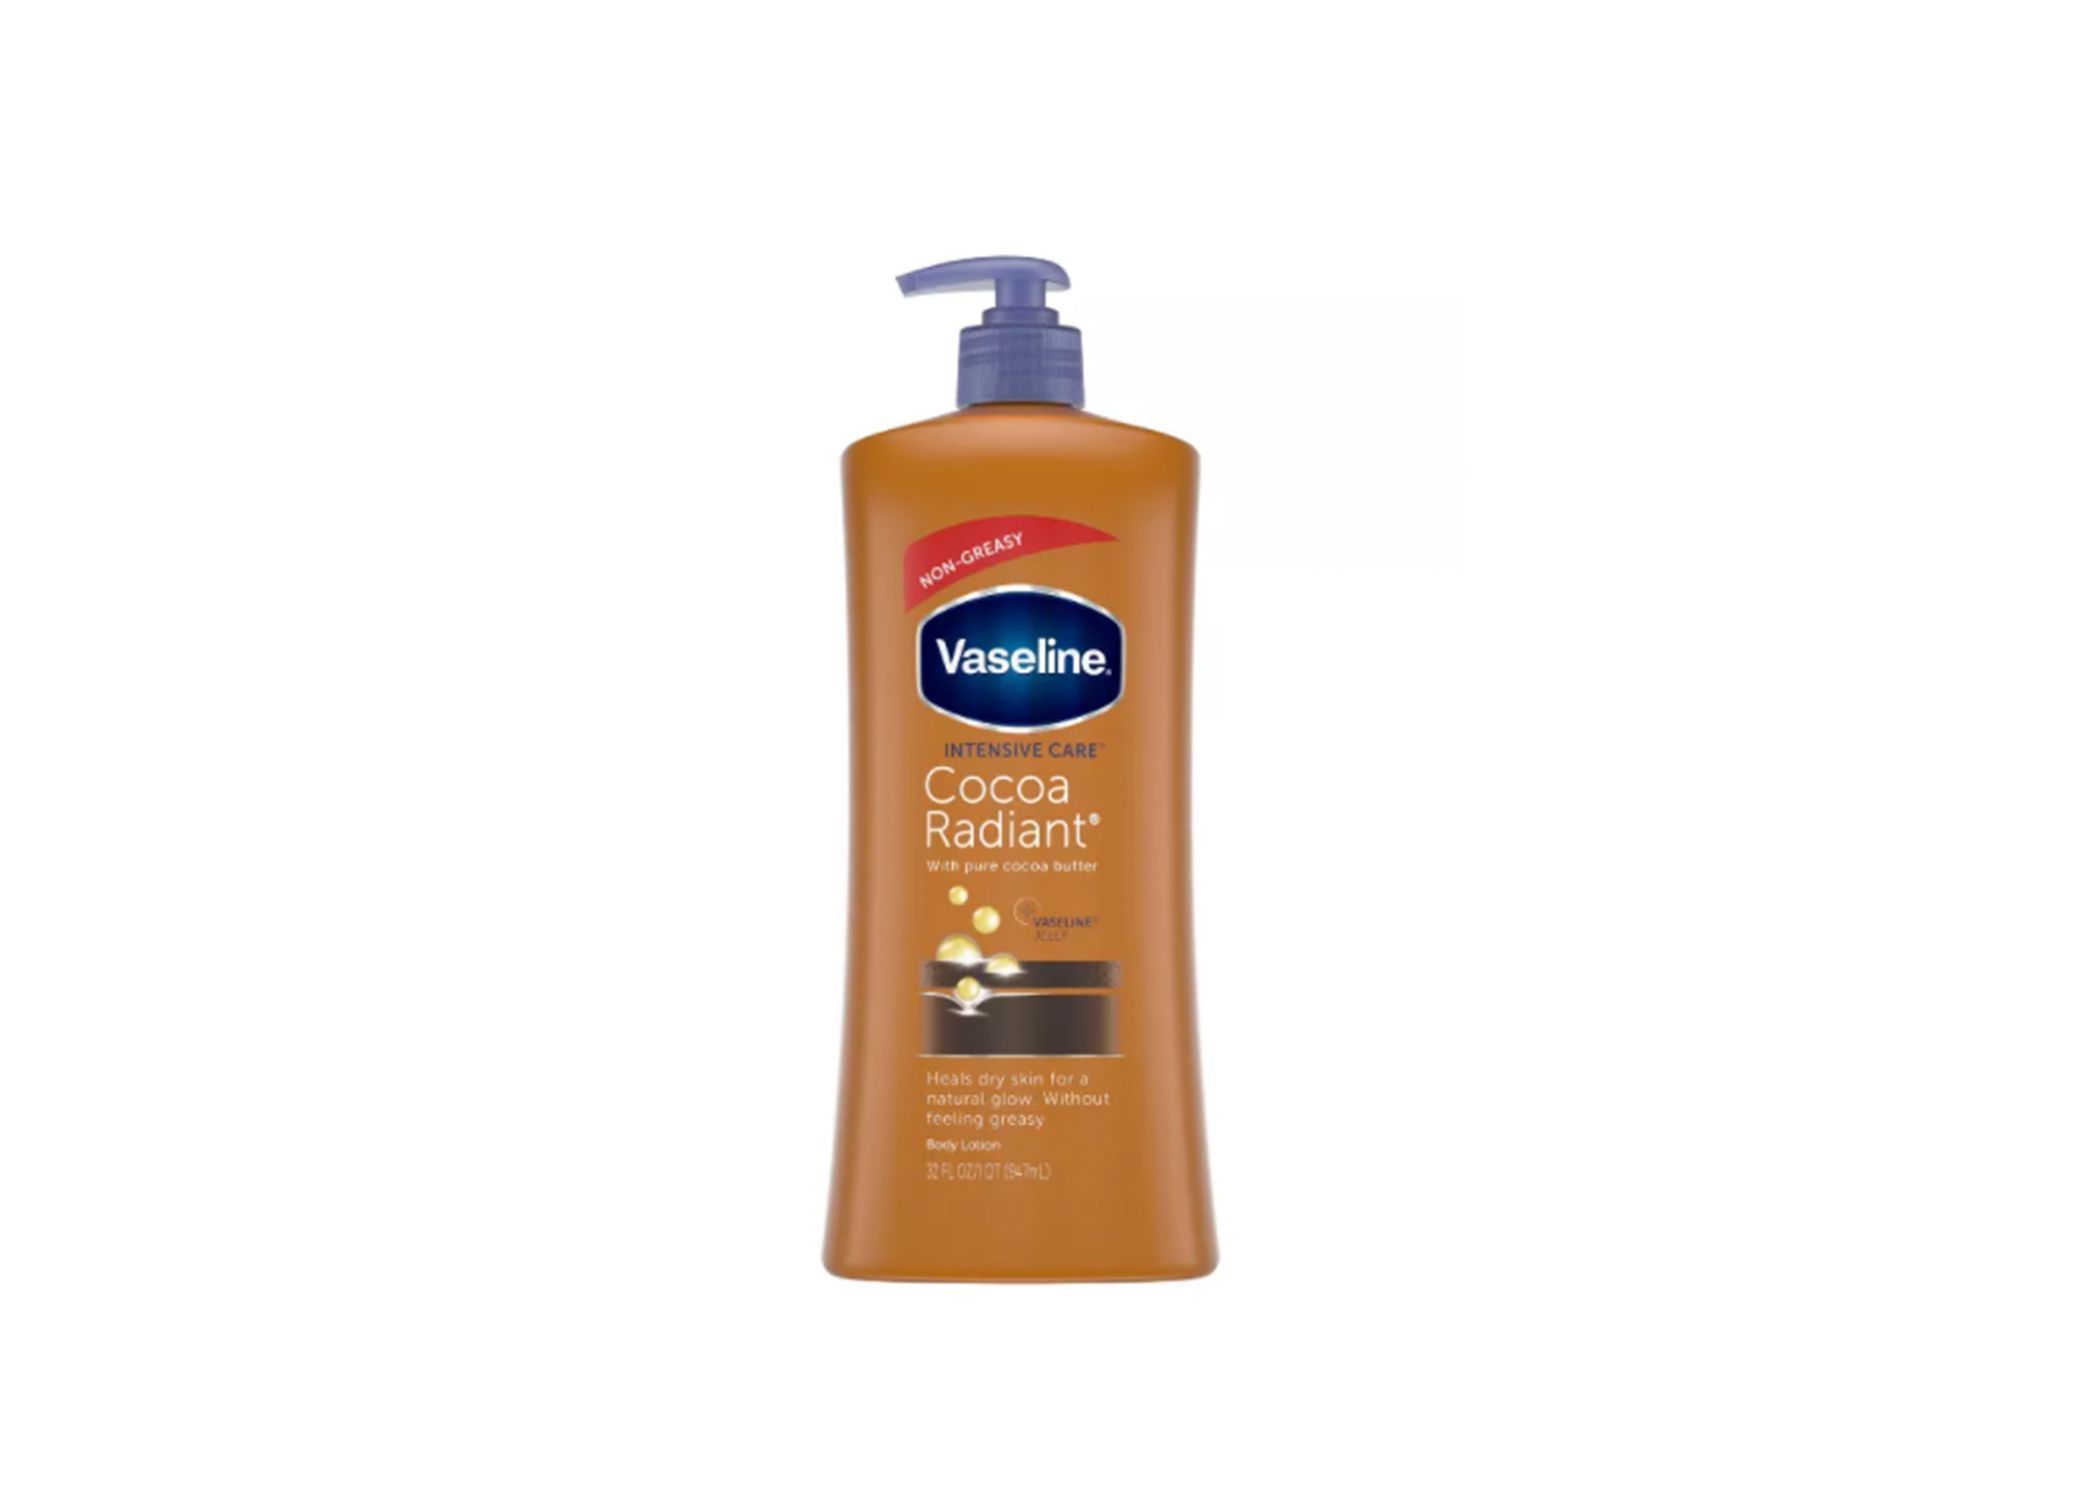 Intensive Care Body Lotion, Cocoa Radiant